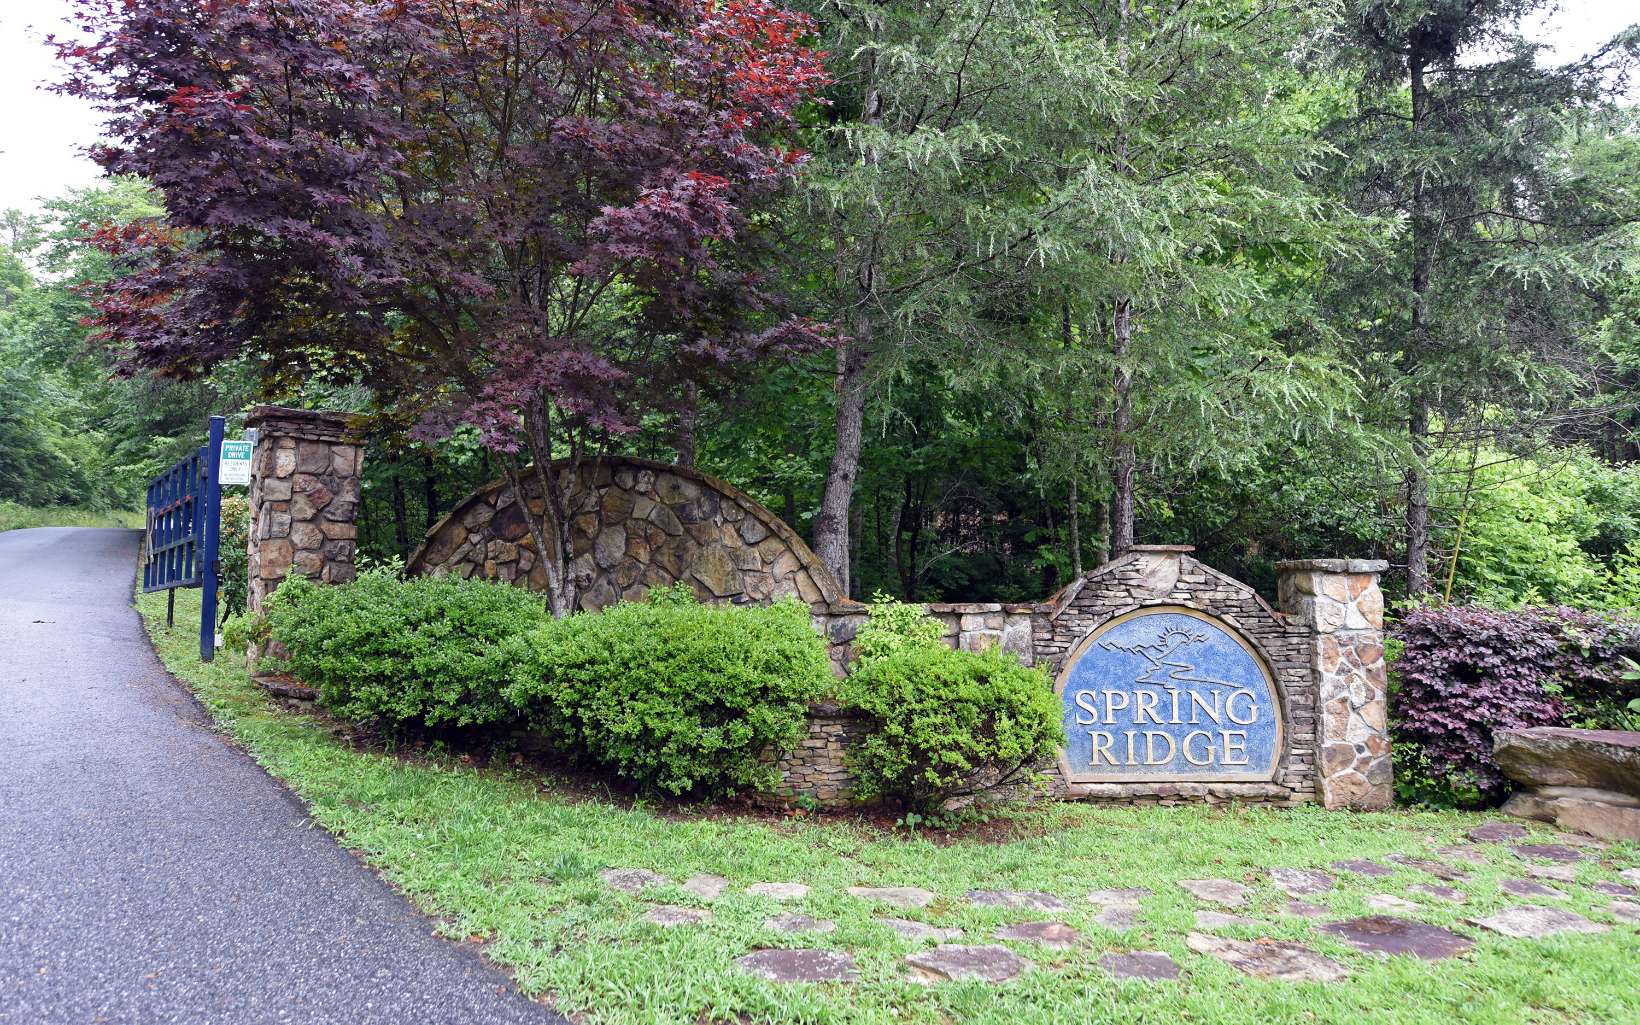 Great building lot in the gated subdivision of Spring Ridge. The lot has a driveway from the paved road up to the perfect spot to build your dream home with mountain views and room for a garage if desired. Spring Ridge is centrally located between Blue Ridge and Blairsville. Soil work completed. BREMC fiber is available on Squirrel Hunting Road near subdivision entrance. Come check out this lot and see if this will be the perfect spot for you!